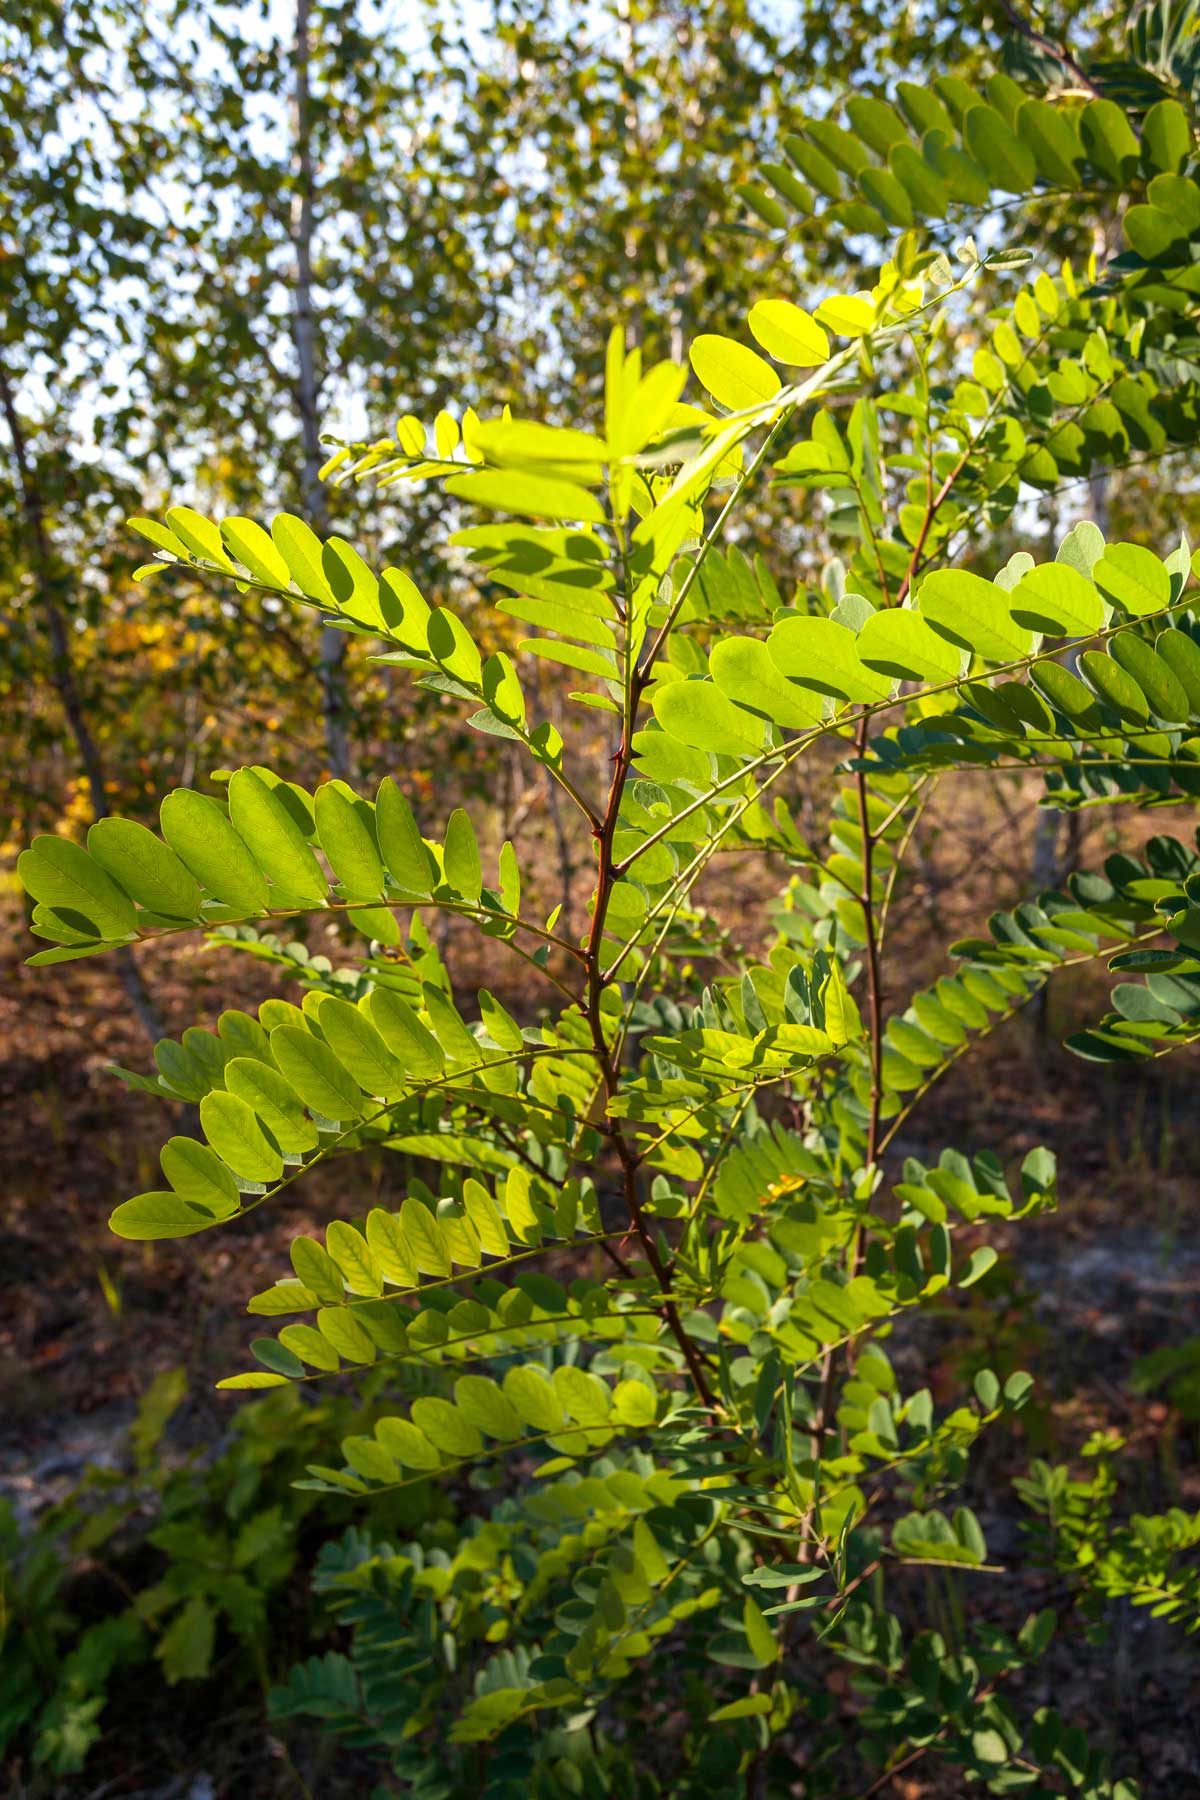 The photo shows a very young robinia, just under two meters high and with green foliage, in an area of grassland. In the background are young birch trees.